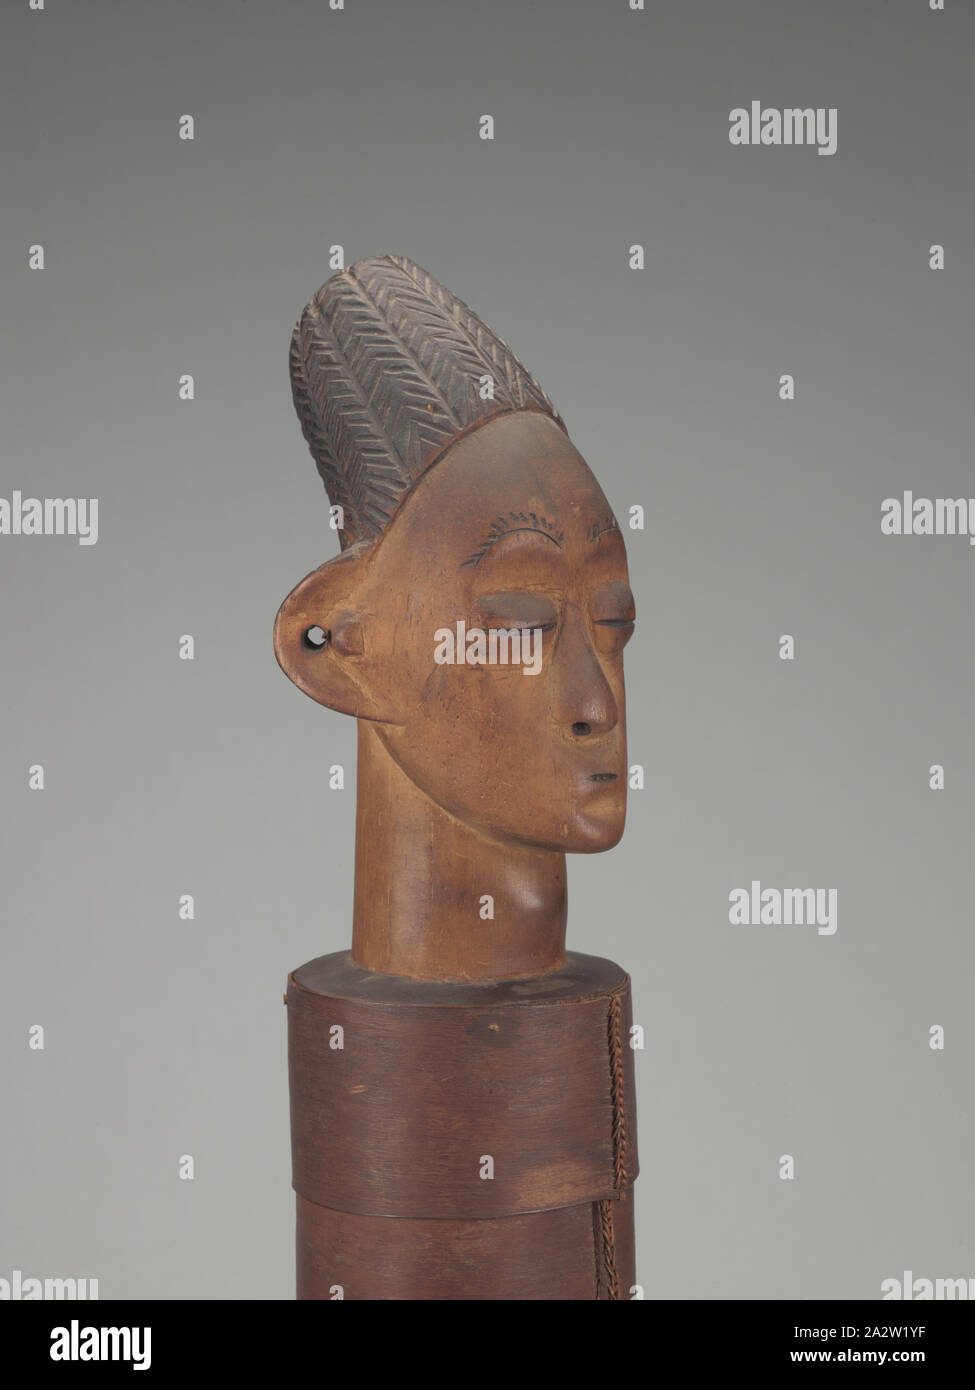 lidded container with human head finial, Songo (Congolese, late 19th century-early 20th century), 1900-1910, wood, bark, pigment, A-C) 20-5/8 x 5 x 5 in. (installed) A) head finial lid: 10-1/4 x 4-1/2 x 4-1/2 in. B) container: 6-1/2 x 3-3/4 x 3-3/4 in. C) base: 6-1/2 x 5 x 5 in., C) Inscribed, Pyro engraved on vertical side of base: Song DekVoi [have not translated DekVoi which is possibly a location or family reference] C) Inscribed in white paint at outer rim of base, Brill collection inventory number: 578, African Art Stock Photo